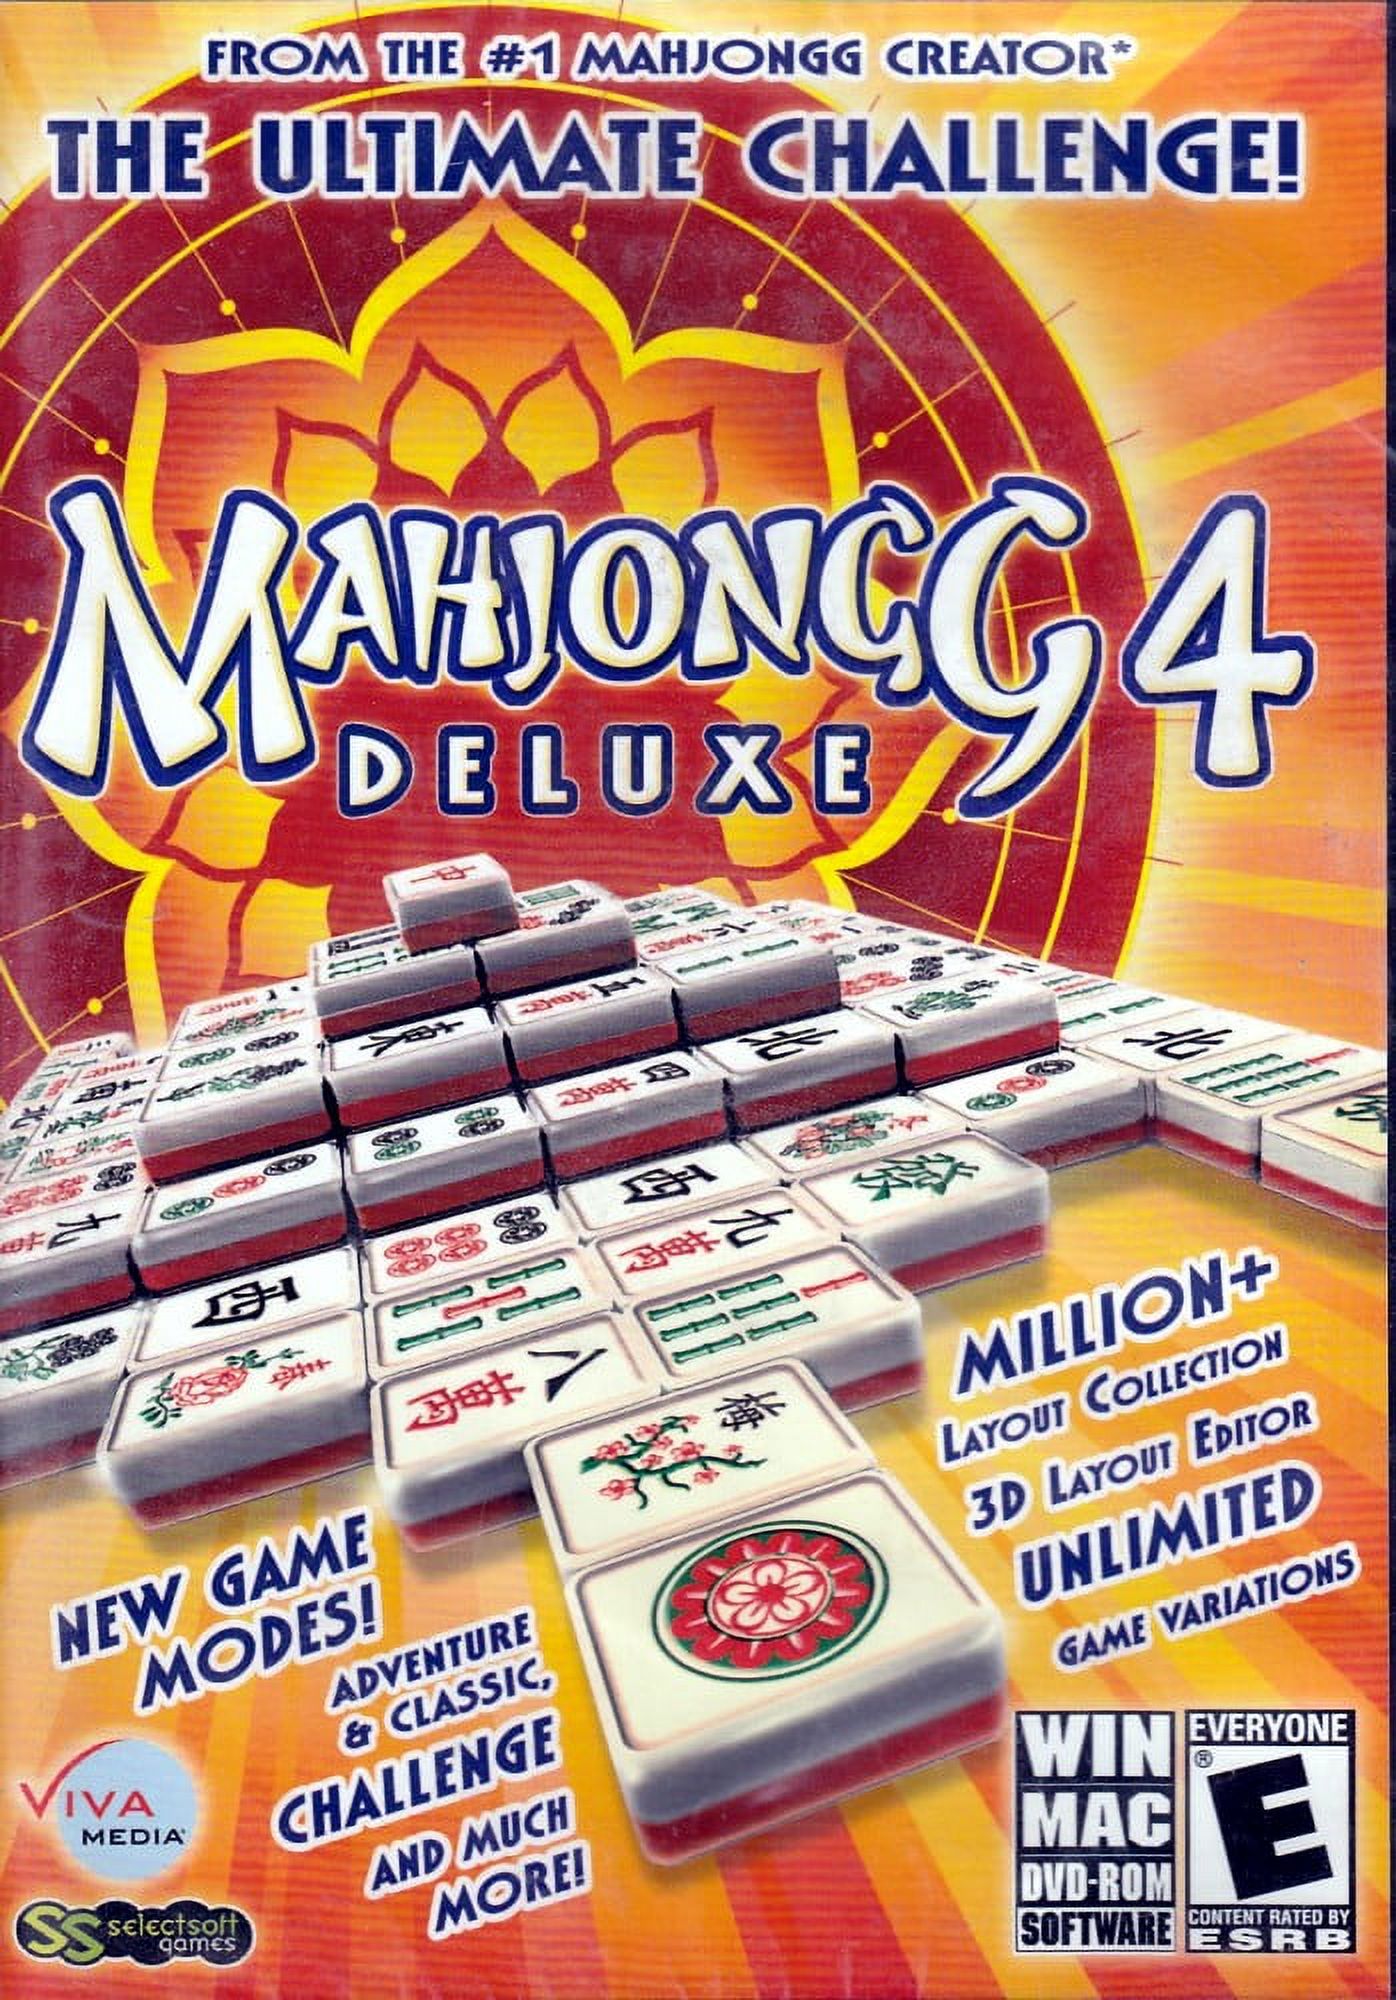 Mahjongg 4 Deluxe: The Ultimate Challenge ~new game modes, million+ layout collection - image 1 of 1